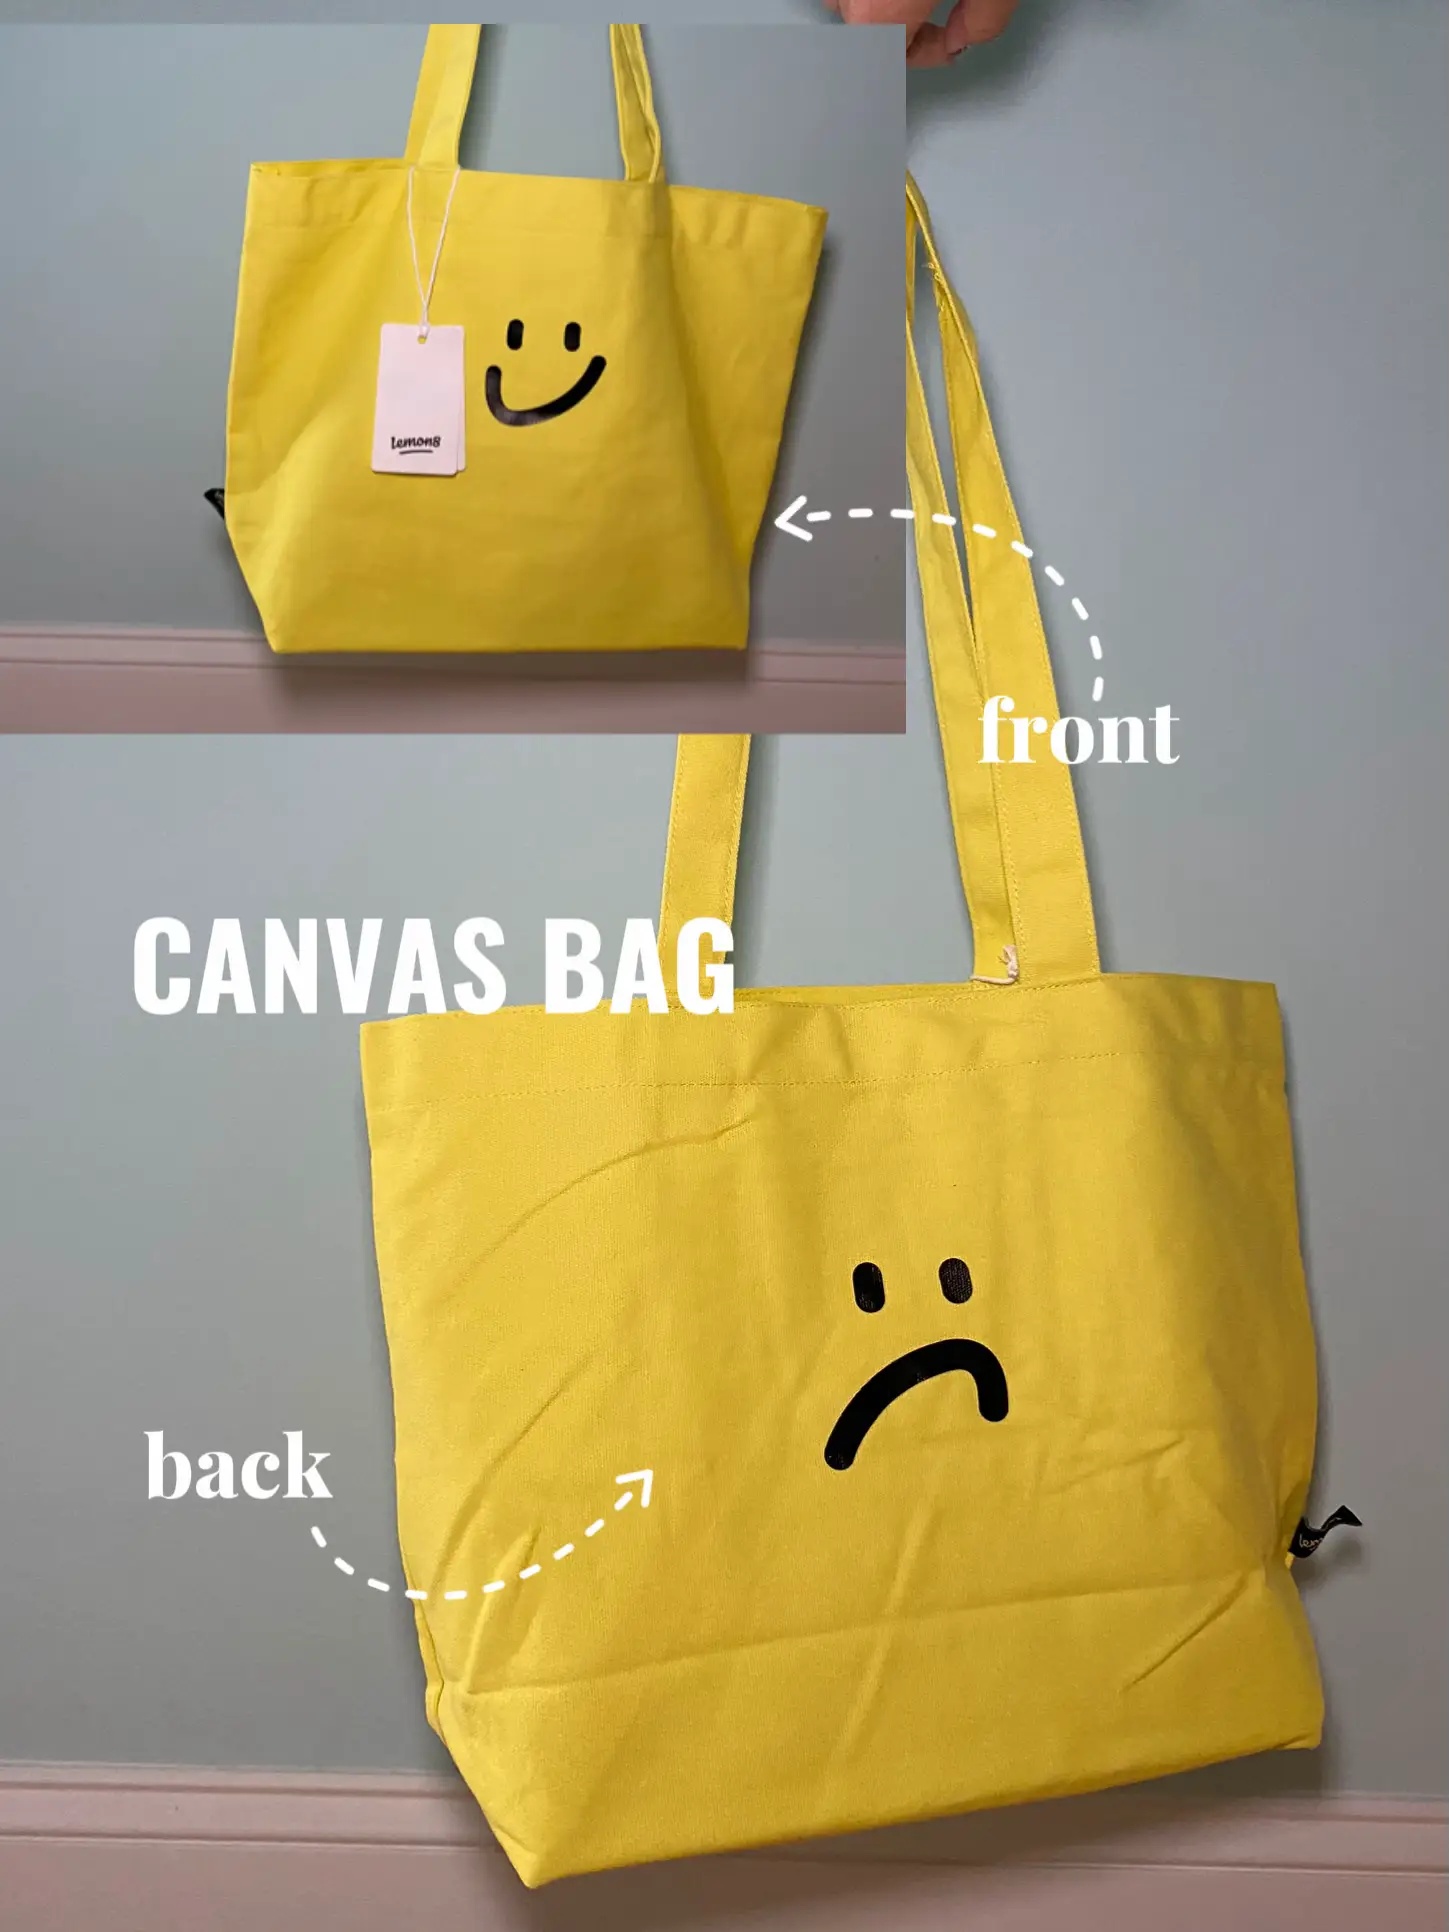  A green canvas bag with a smiley face on it.